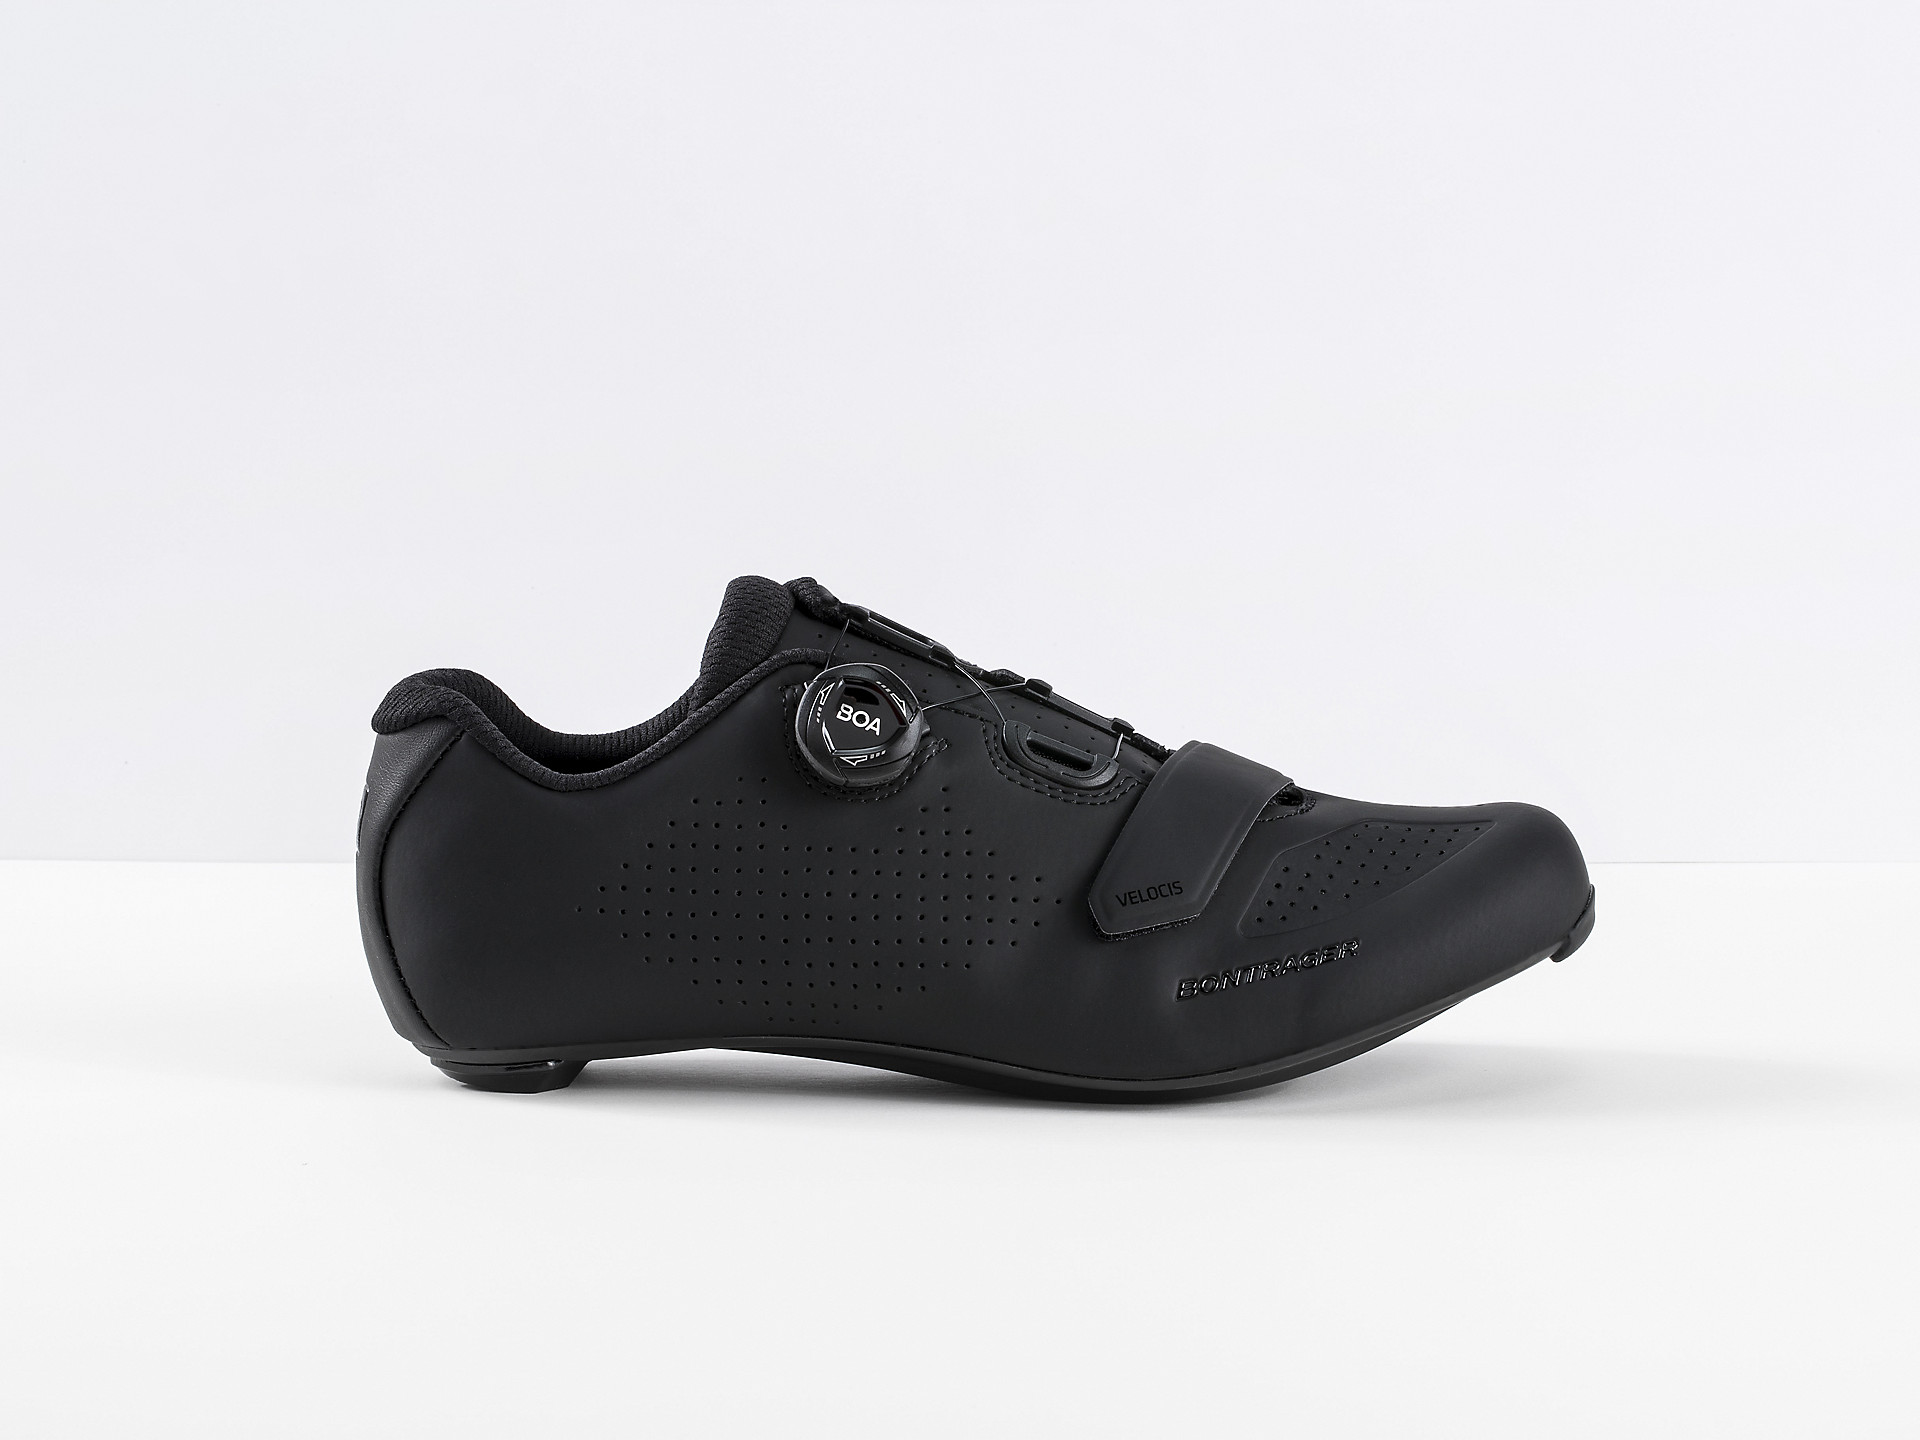 <a href="https://cycles-clement.be/product/bont-chaussures-velocis-42-black/">BONT CHAUSSURES VELOCIS 42 BLACK</a>